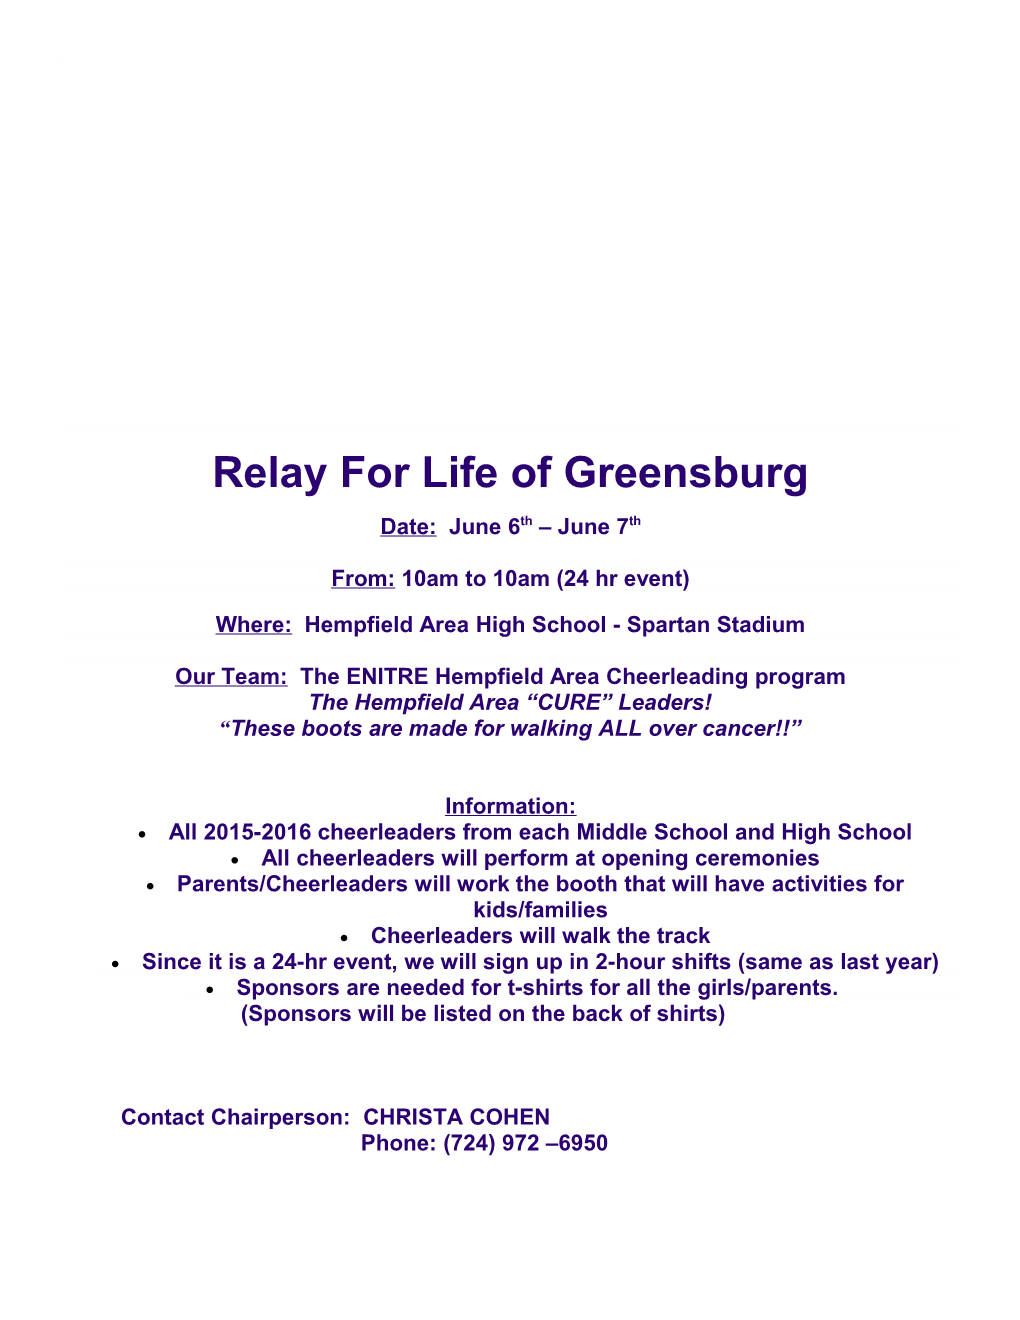 Relay for Life of Greensburg